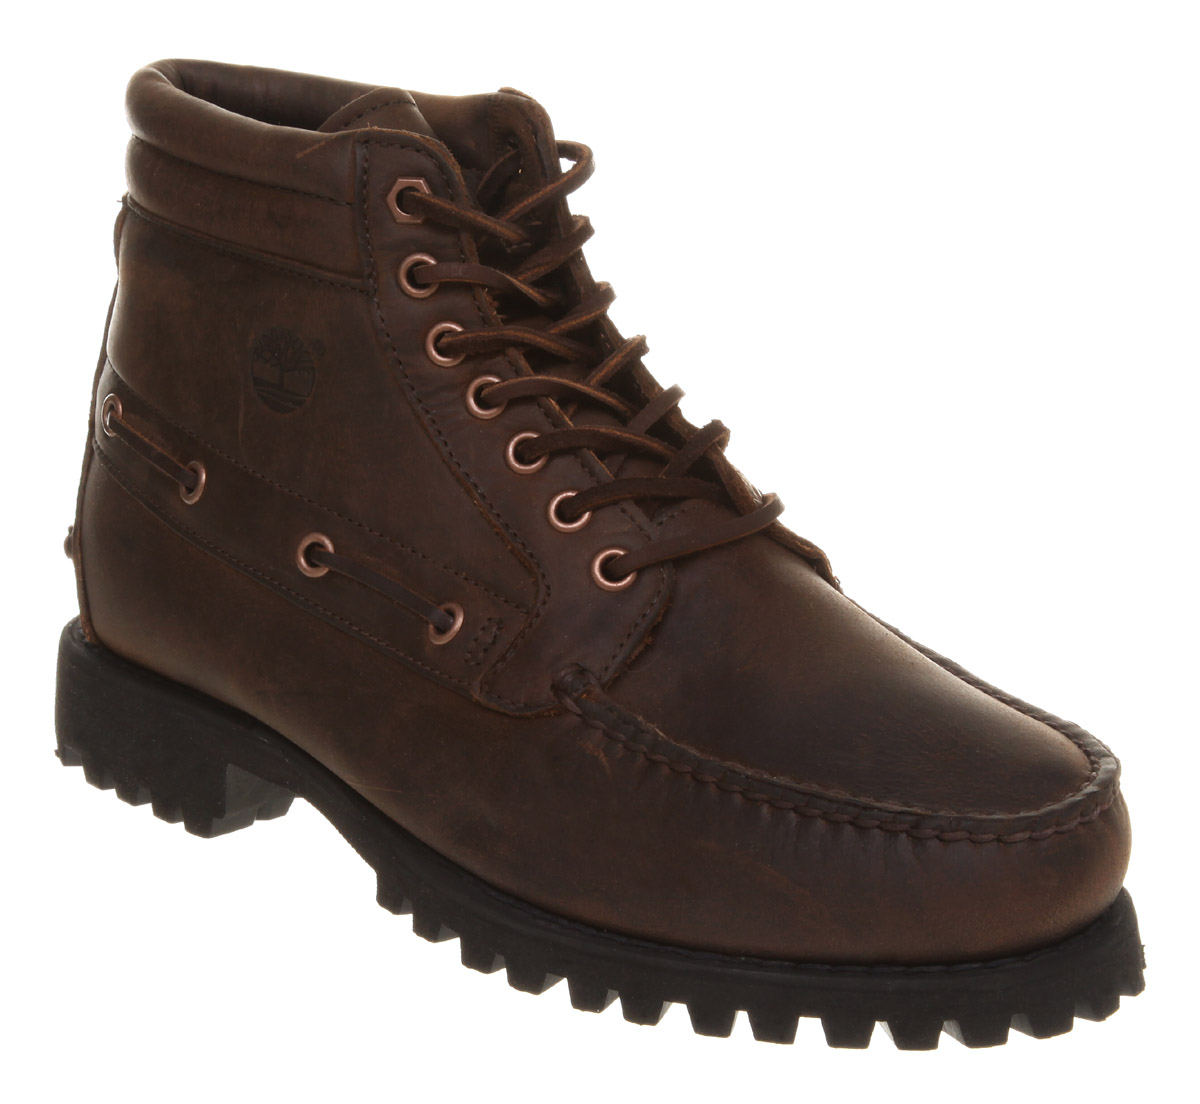 Timberland 7 Eye Chukka Boot in Brown for Men - Lyst